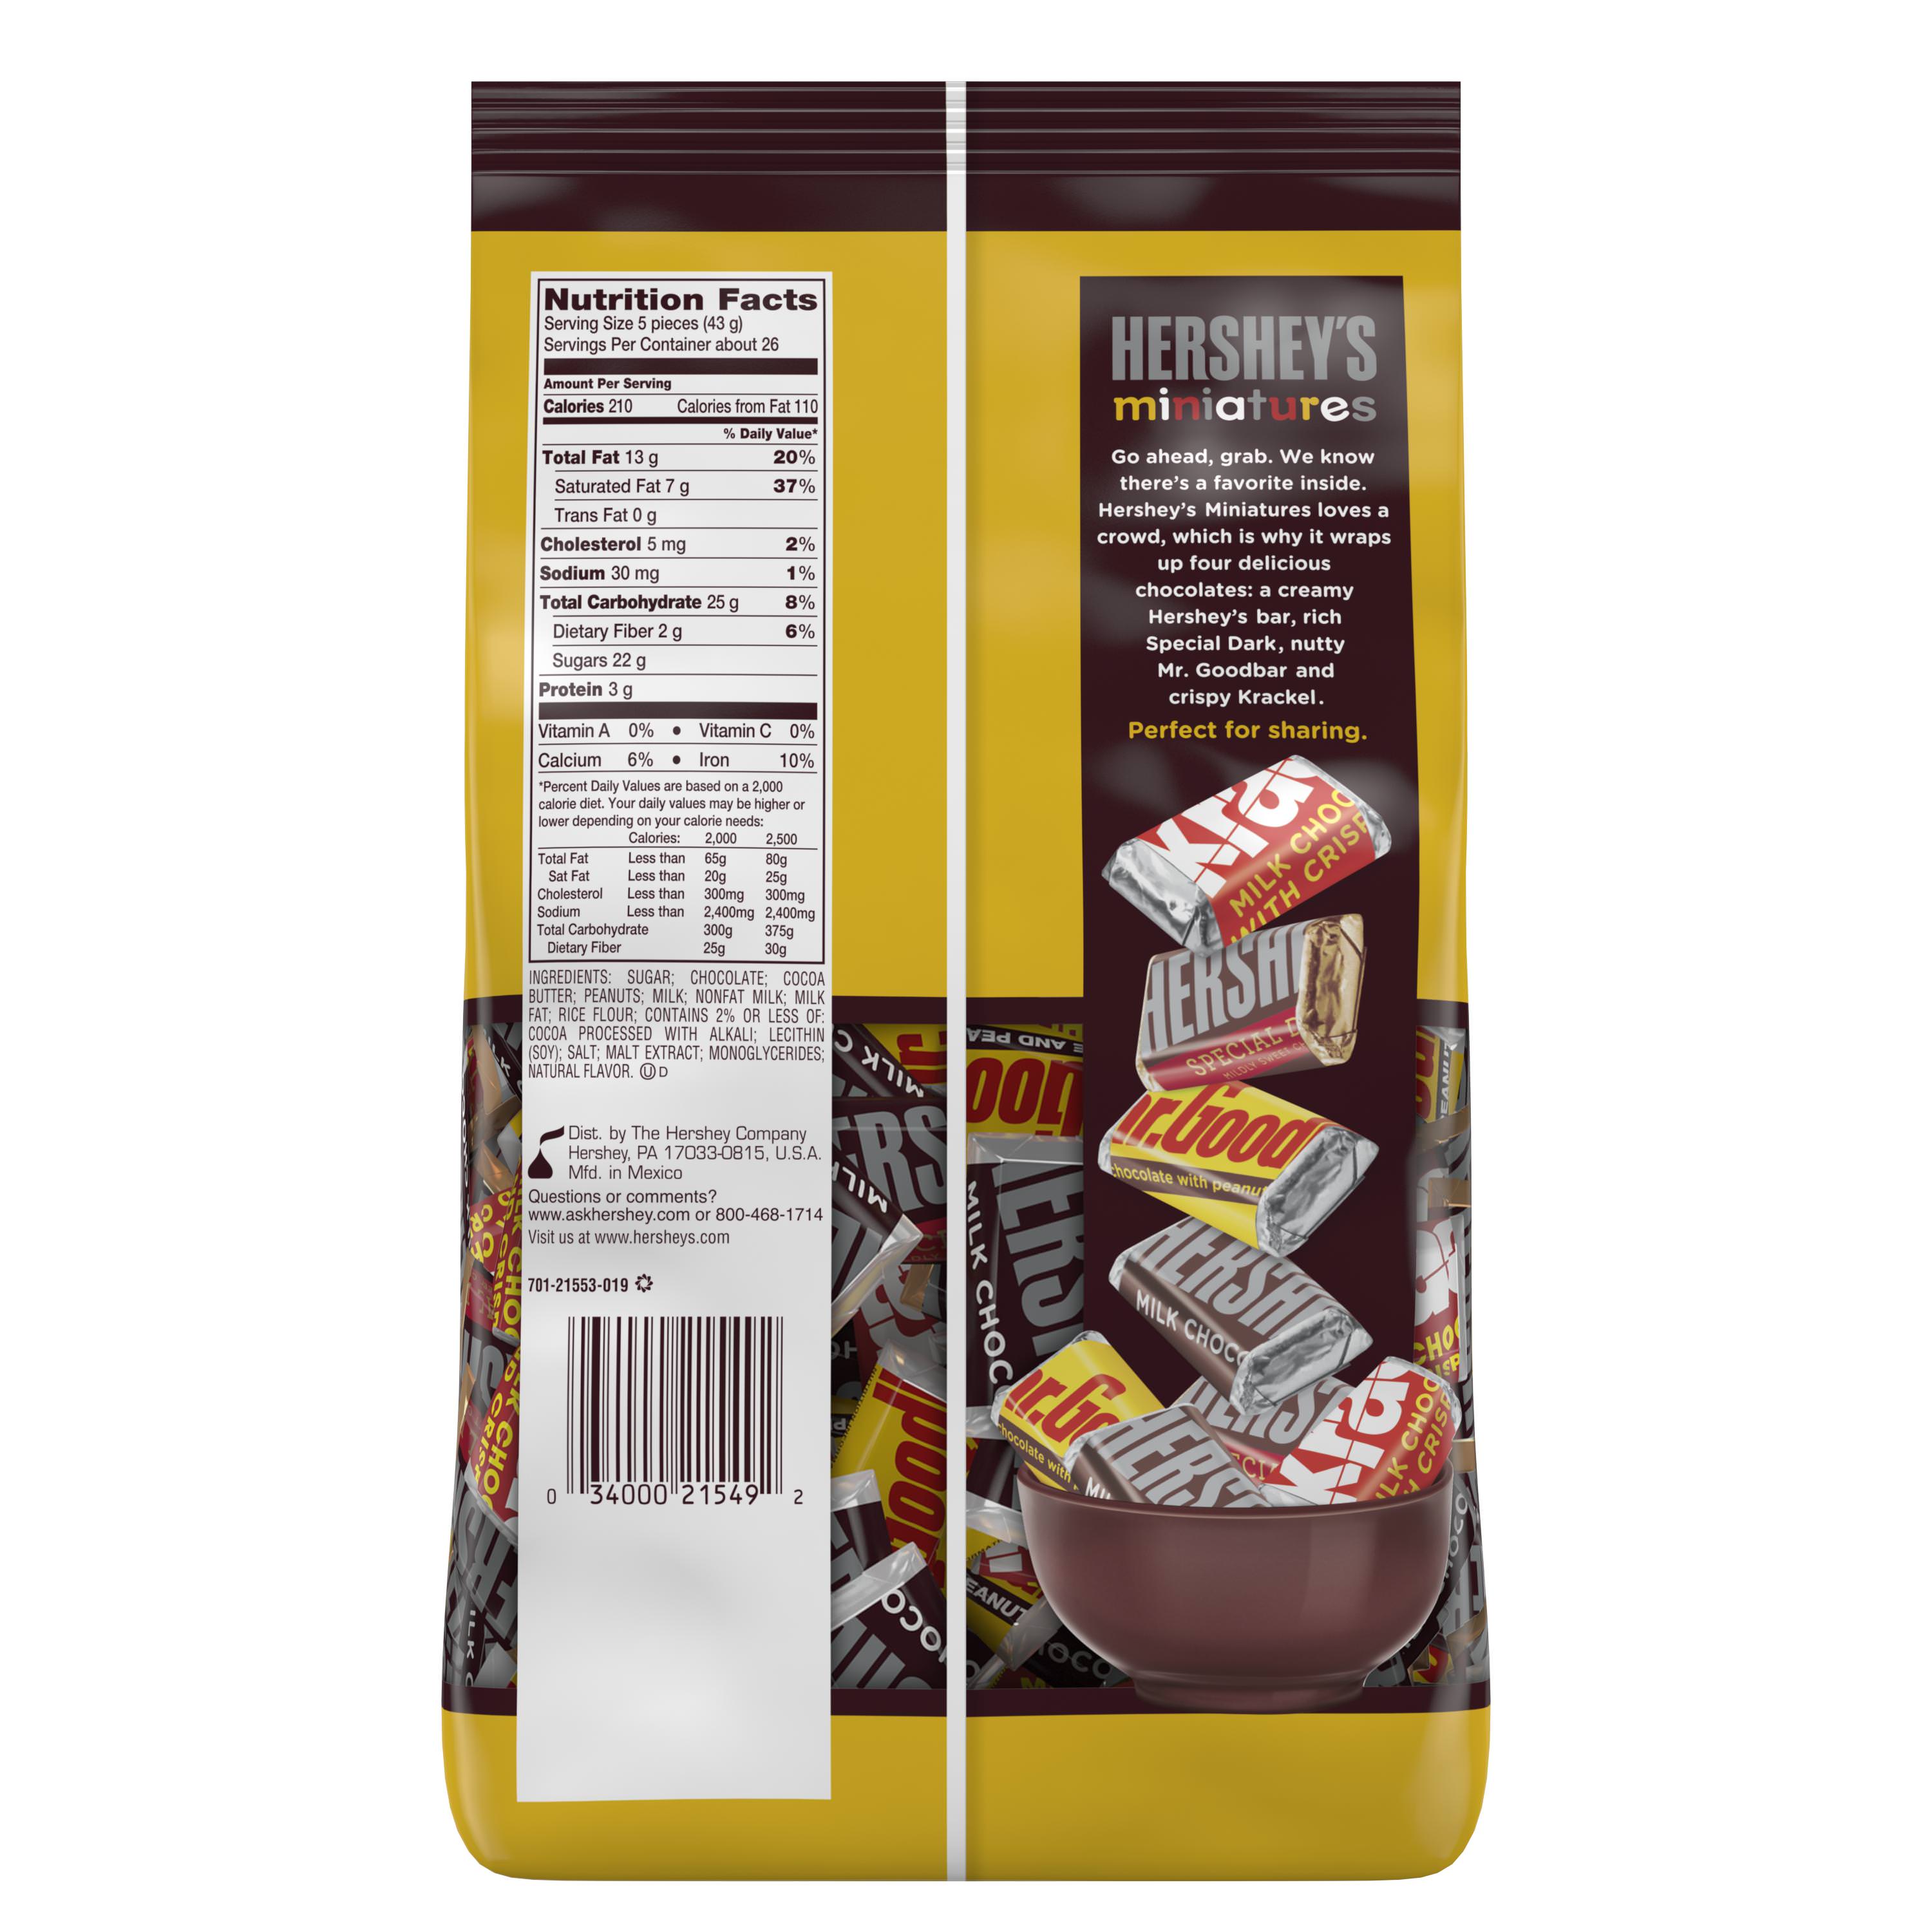 Hershey's, Miniatures Assortment Chocolate Candy, 40 Oz - image 2 of 8